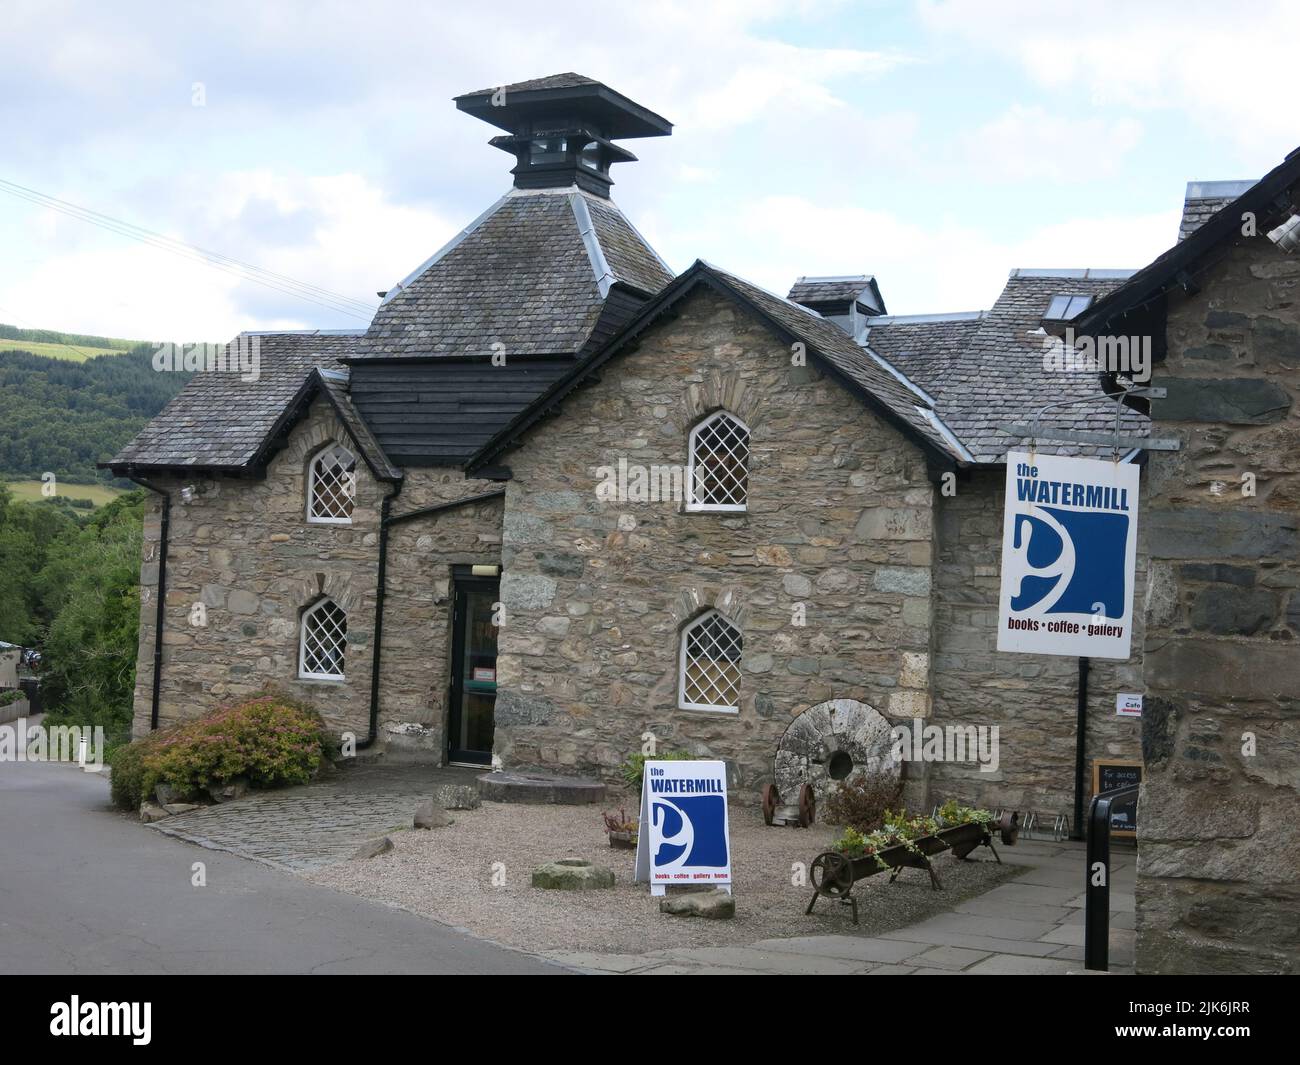 In a former oatmeal mill, The Watermill is an award-winning independent bookshop, gallery & cafe in the Scottish town of Aberfeldy. Stock Photo